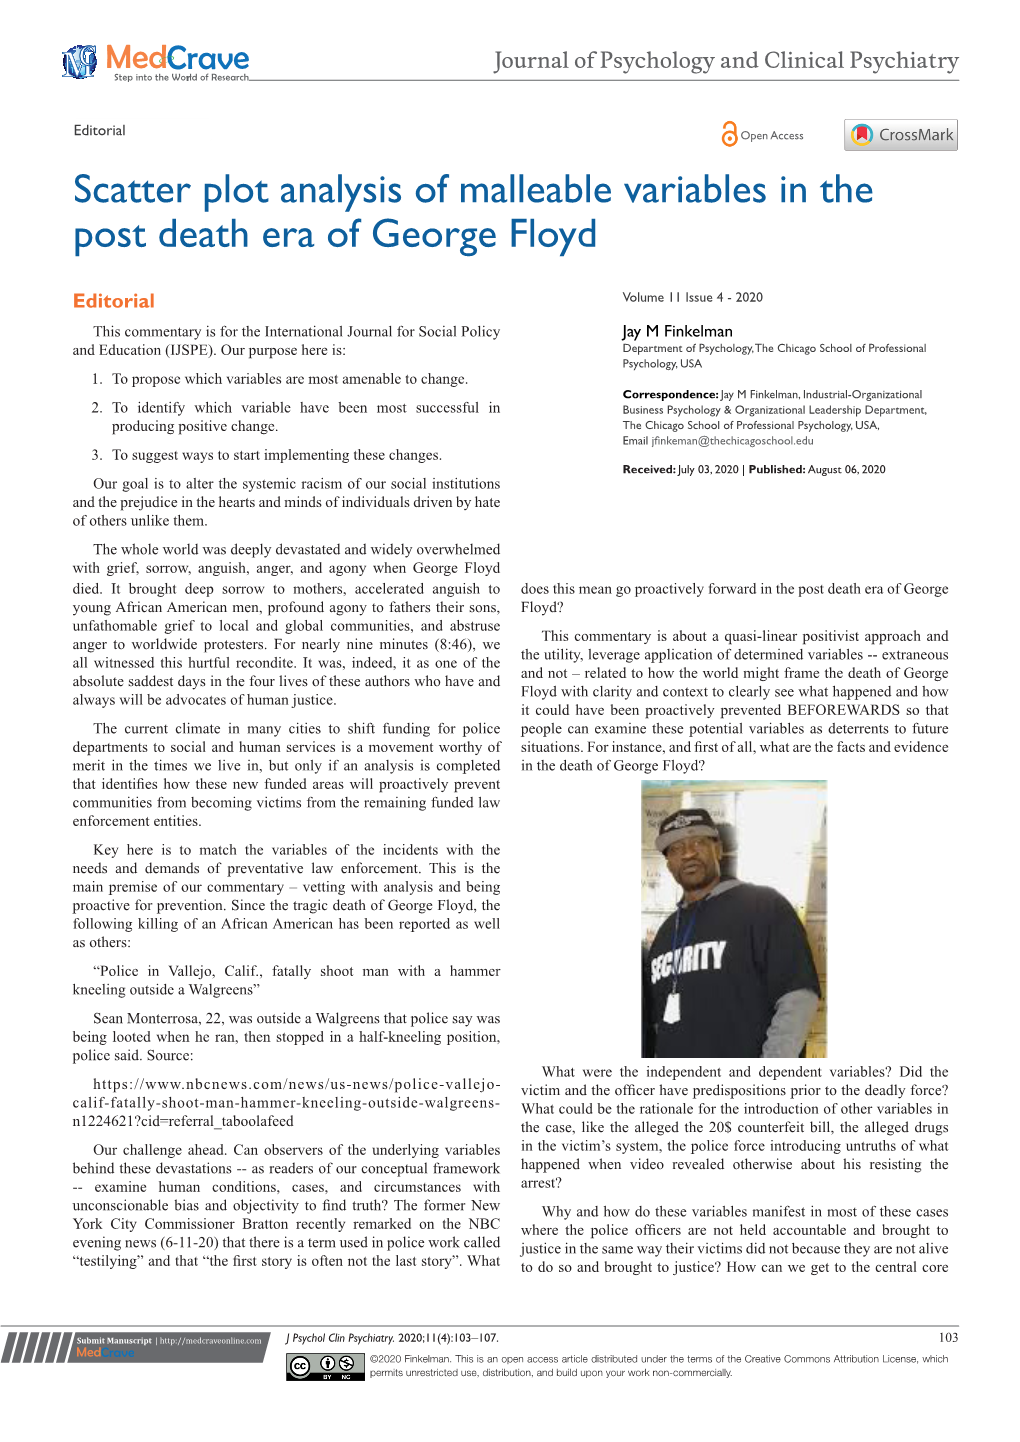 Scatter Plot Analysis of Malleable Variables in the Post Death Era of George Floyd